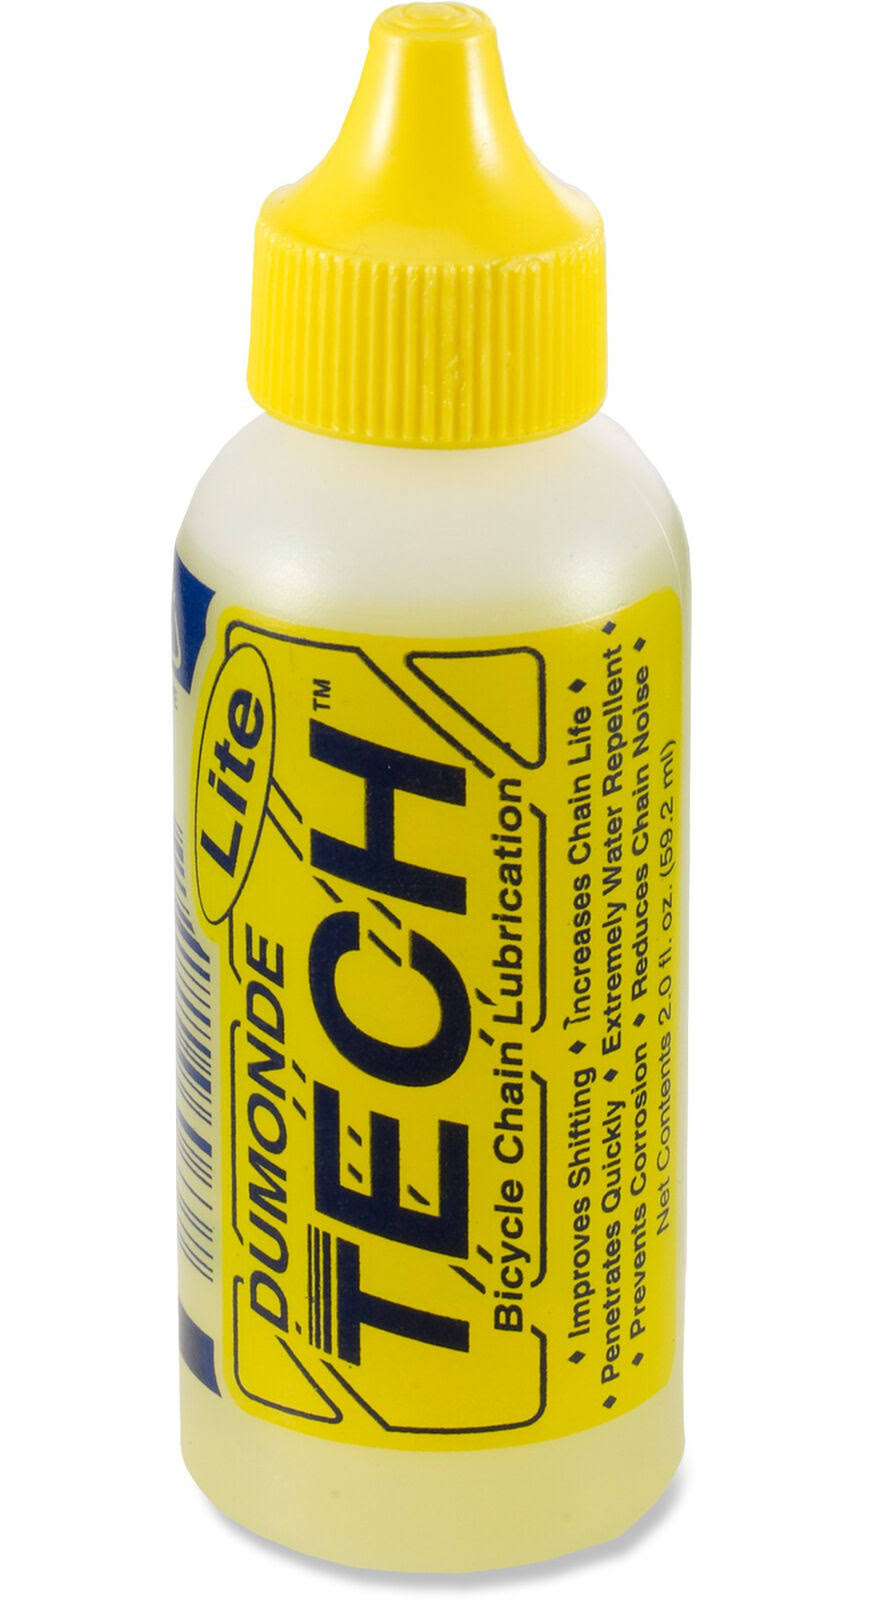 Dumonde Tech Lite Bicycle Chain Lubrication - One Color, 2oz